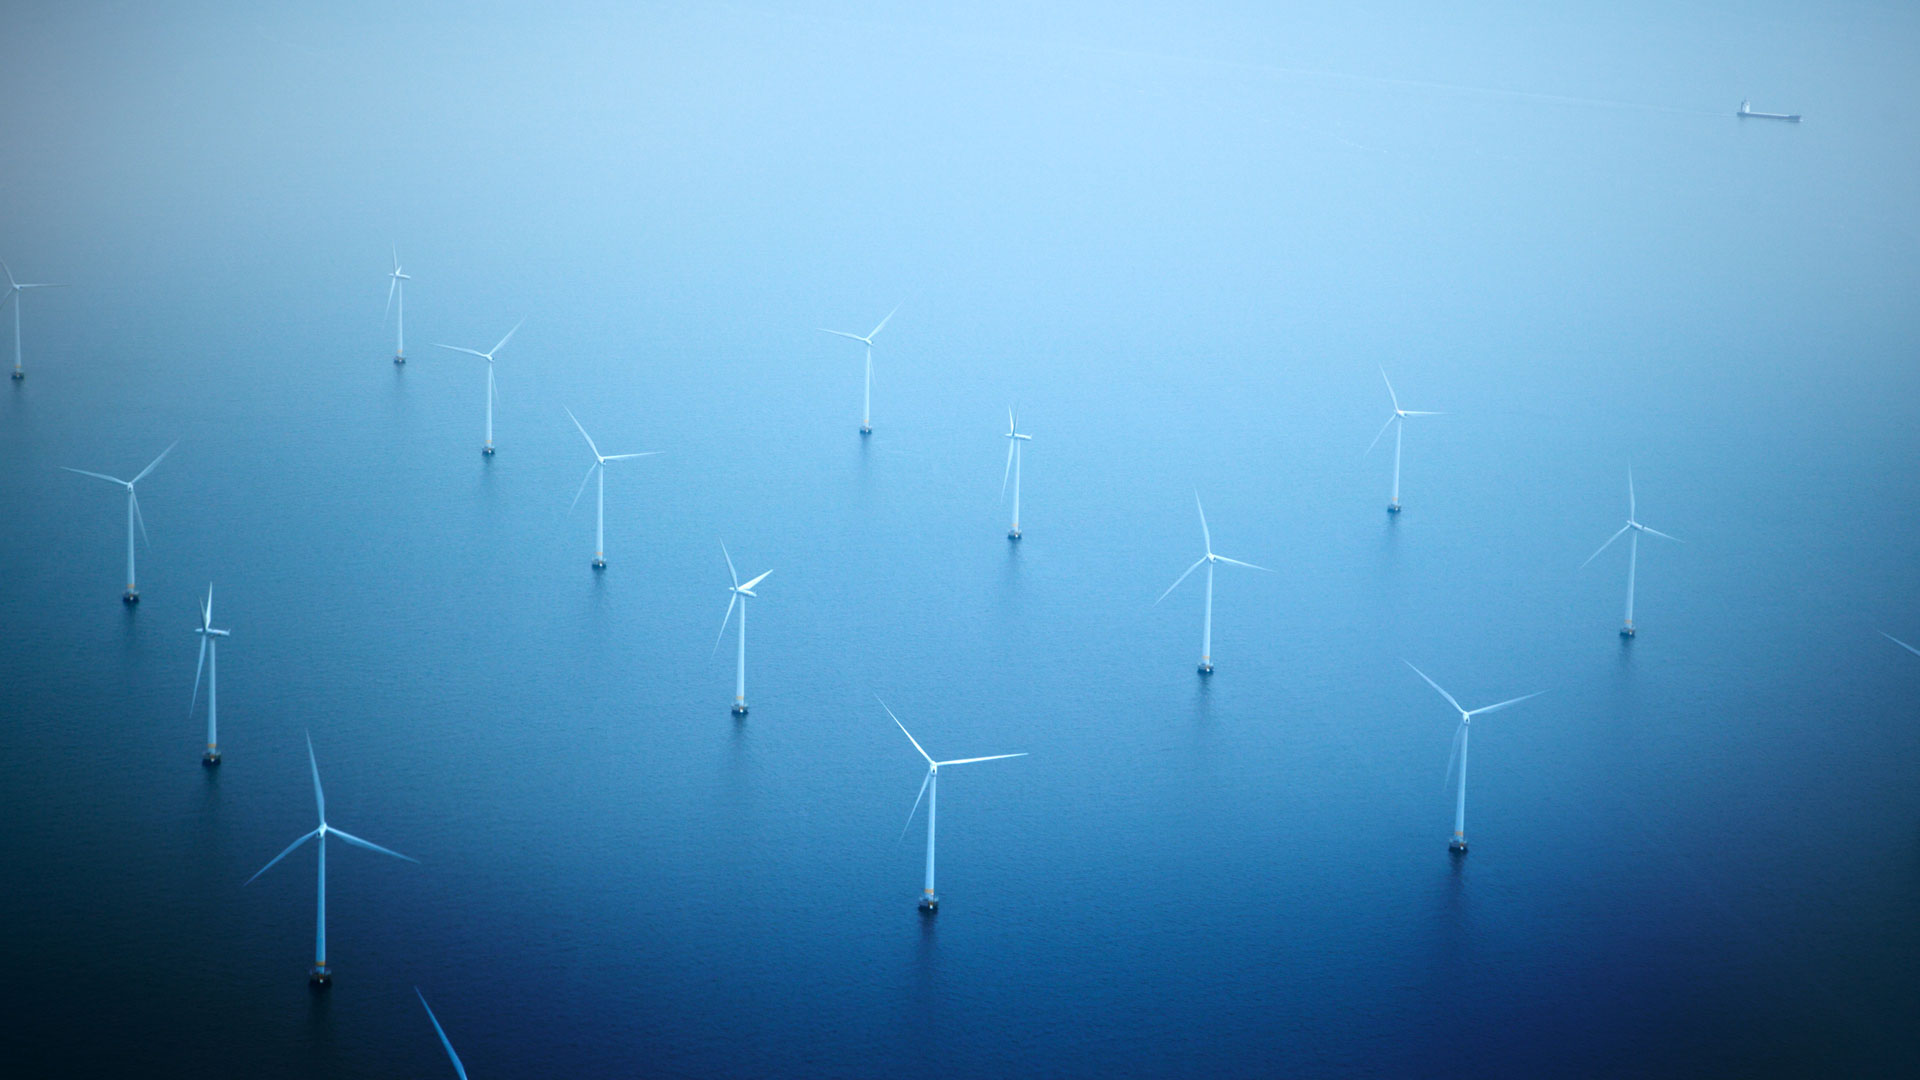 An image of an offshore wind farm, aerial view